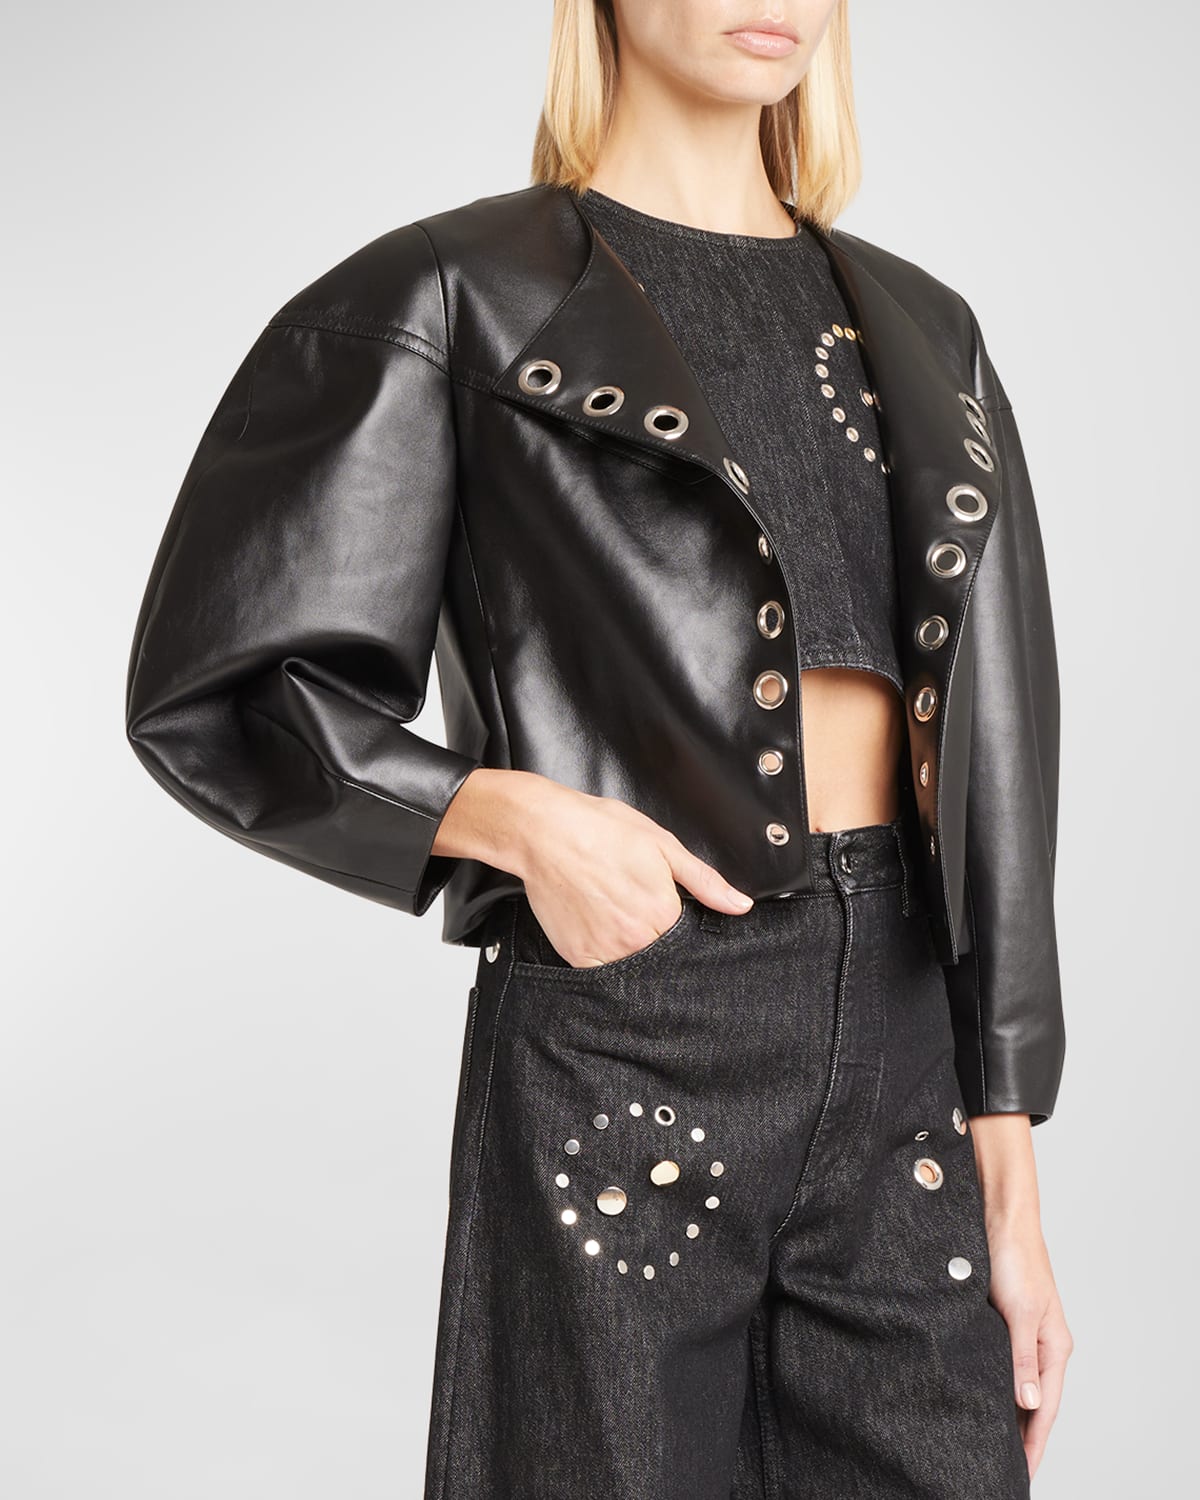 CHLOÉ LEATHER SHORT JACKET WITH GROMMET DETAIL